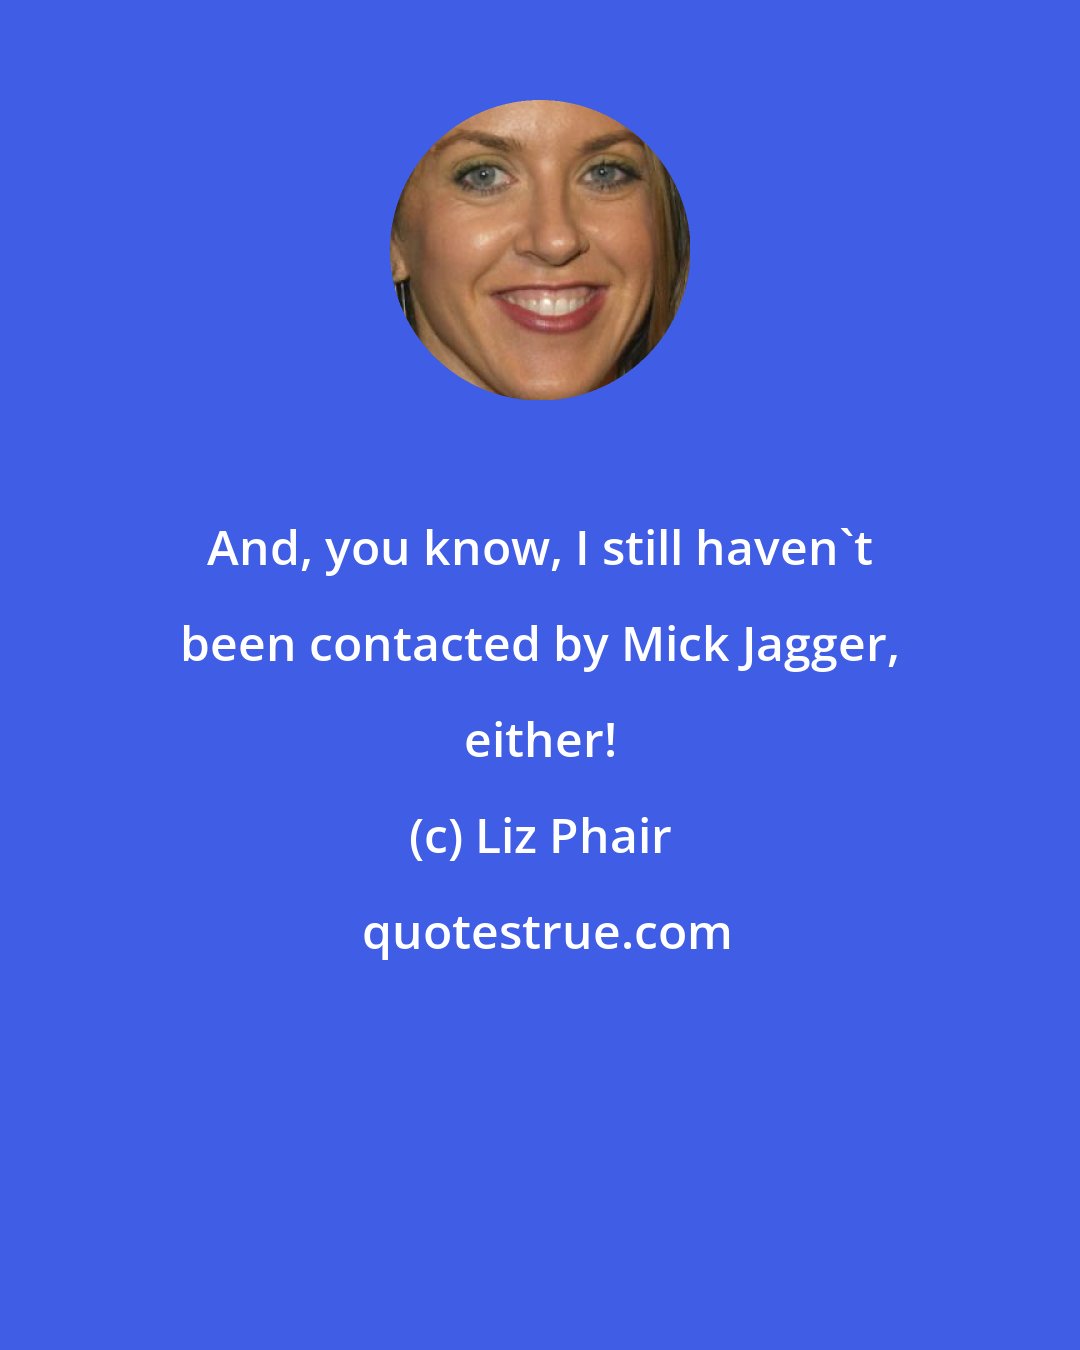 Liz Phair: And, you know, I still haven't been contacted by Mick Jagger, either!